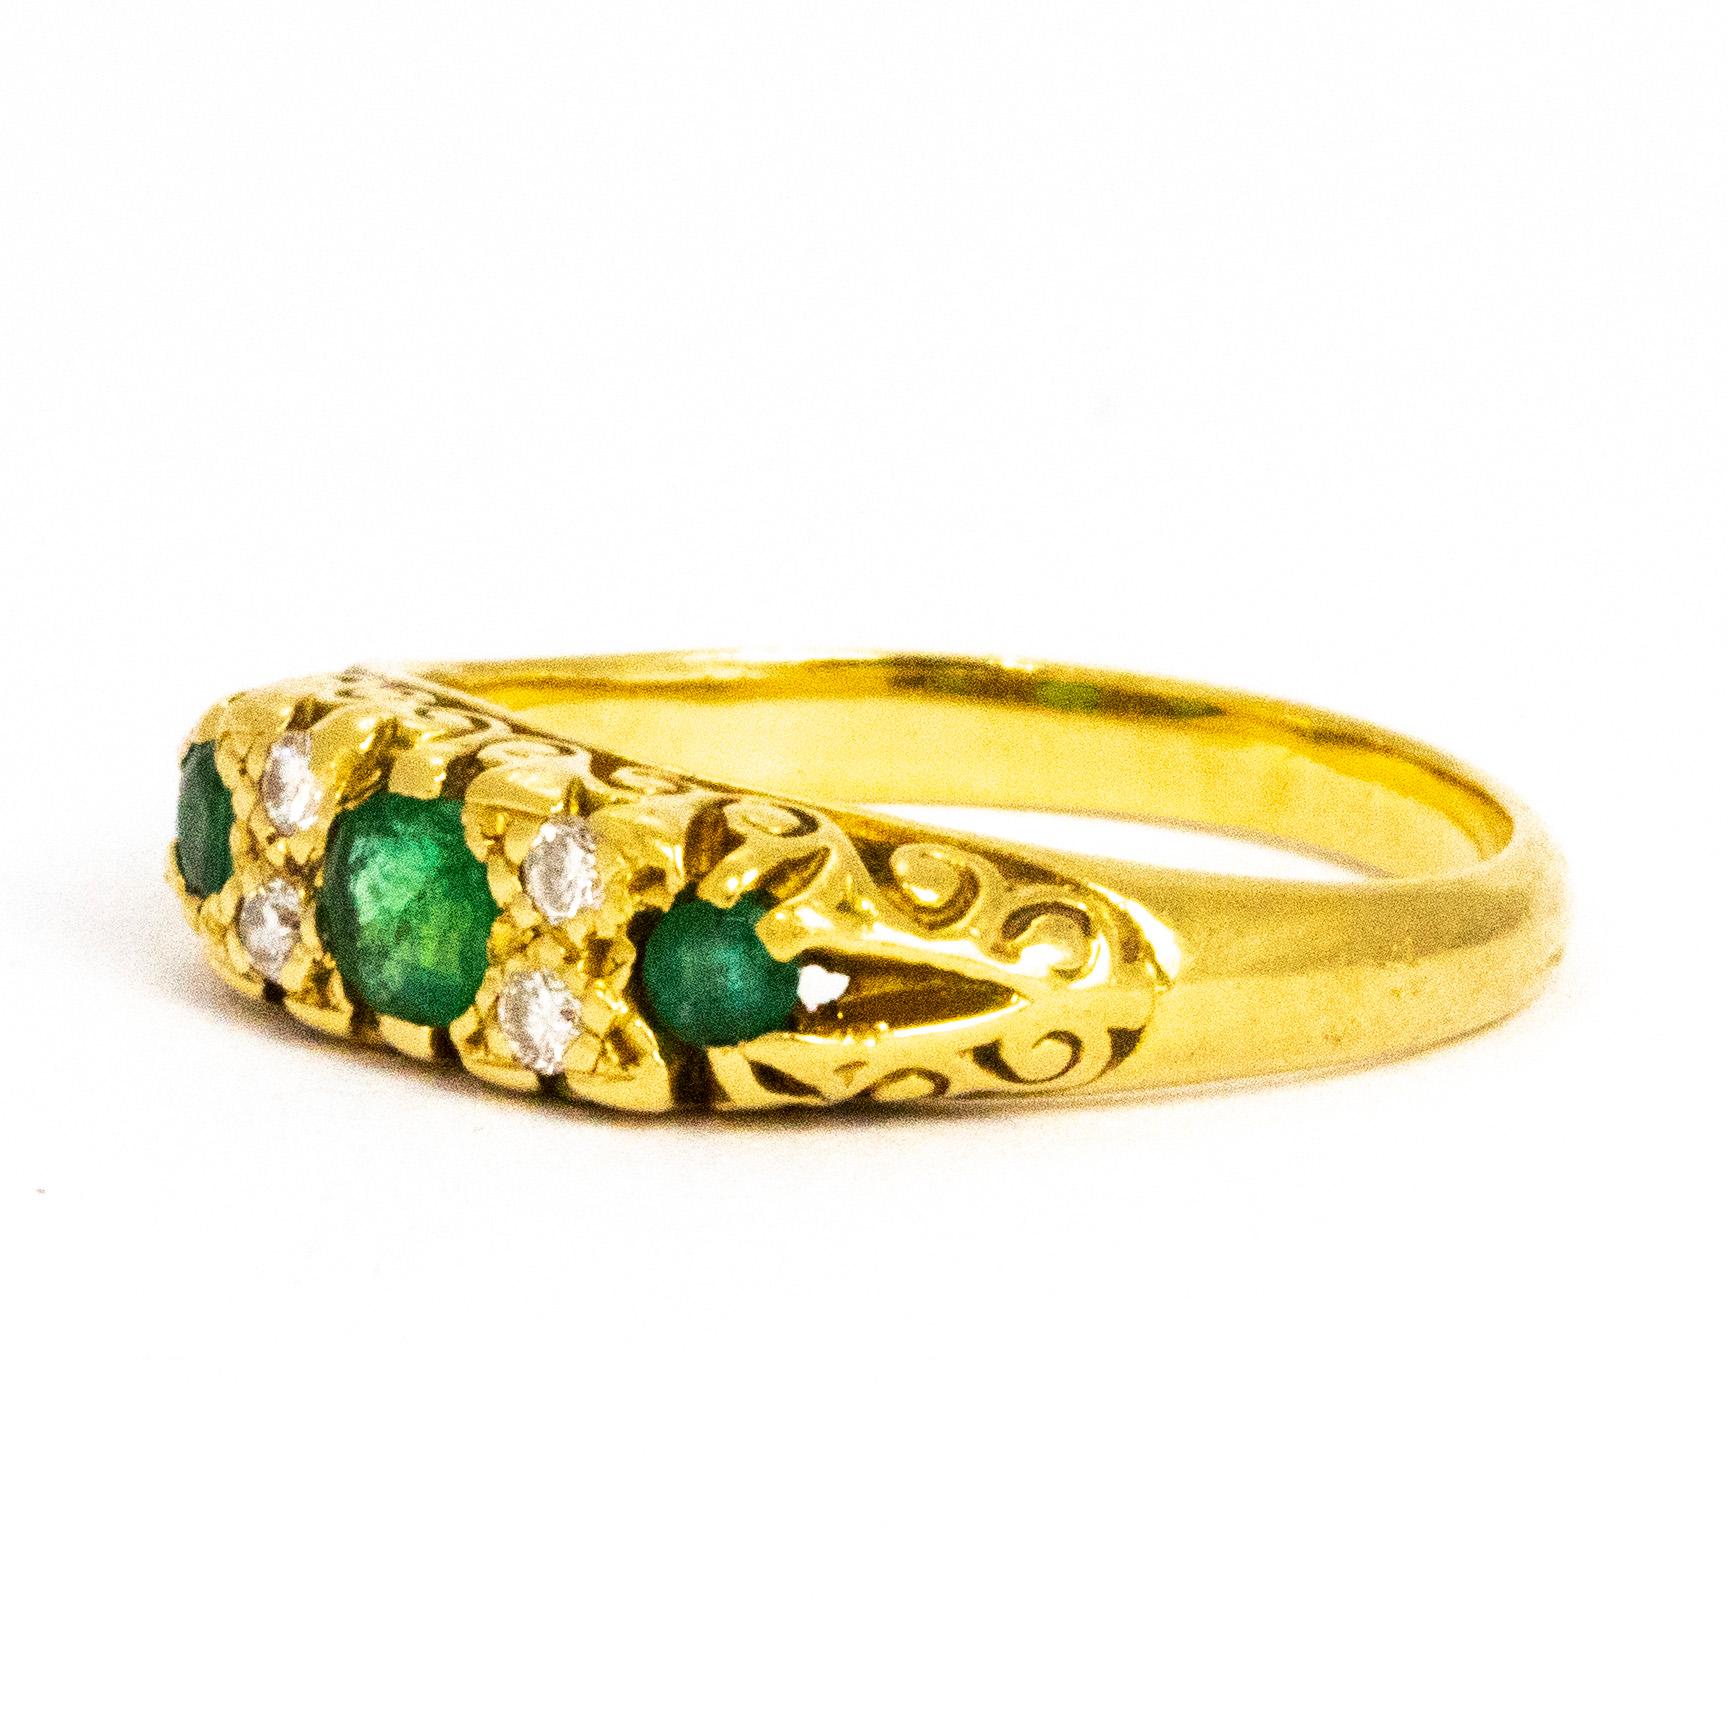 This three stone emerald ring has a 25pt centre stone and the smaller emeralds on the outside measure 7pts each. In between the deep green emeralds sit two pairs of sparkling diamonds measuring 3pts each. The perfect stack ring or just as striking